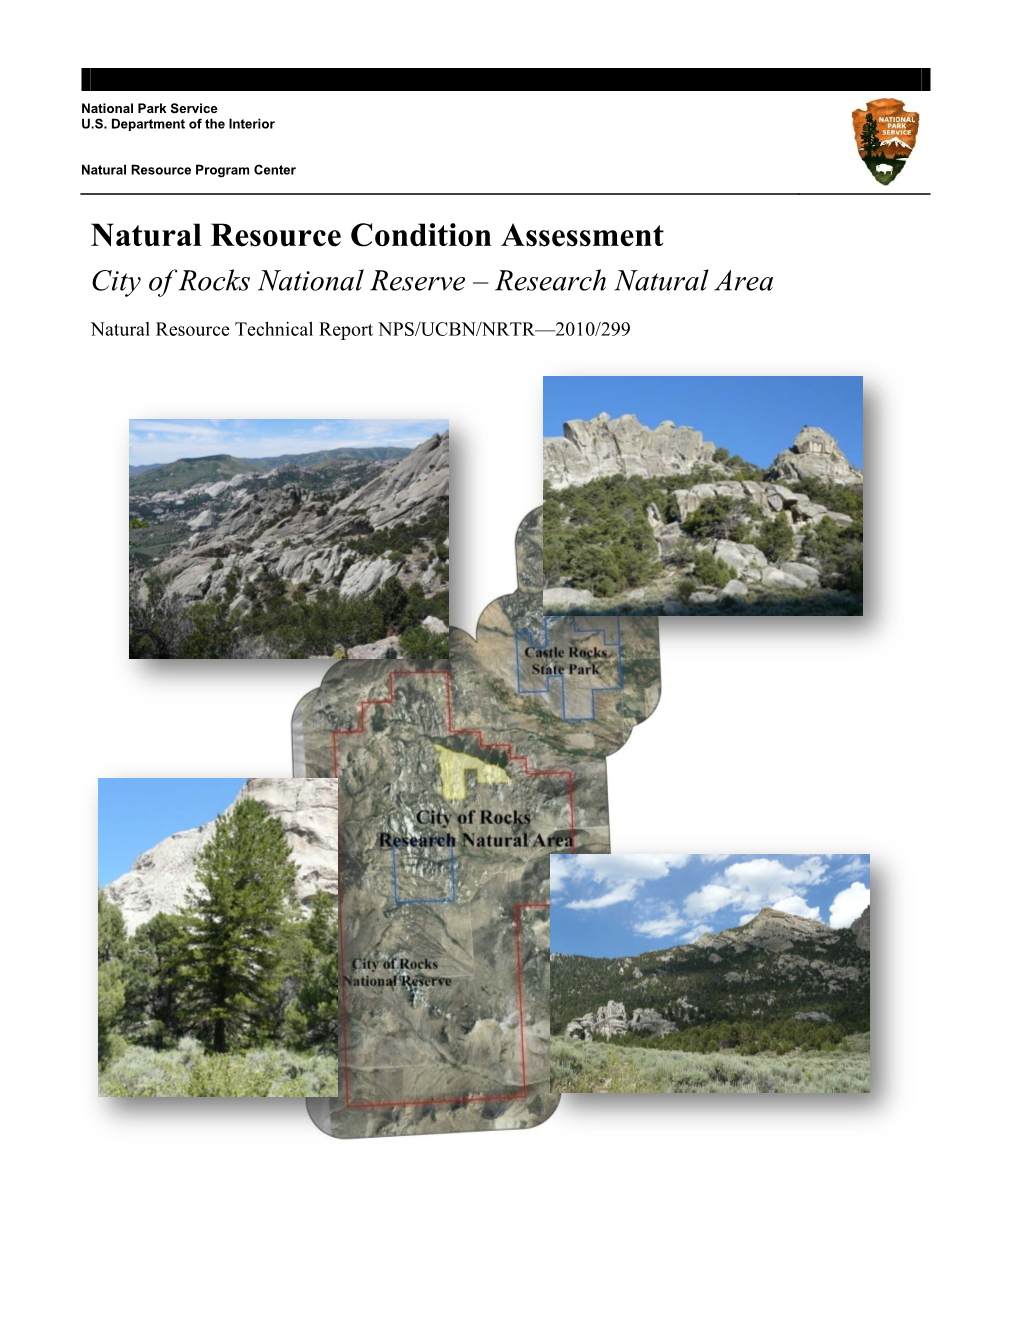 Natural Resource Condition Assessment City of Rocks National Reserve – Research Natural Area